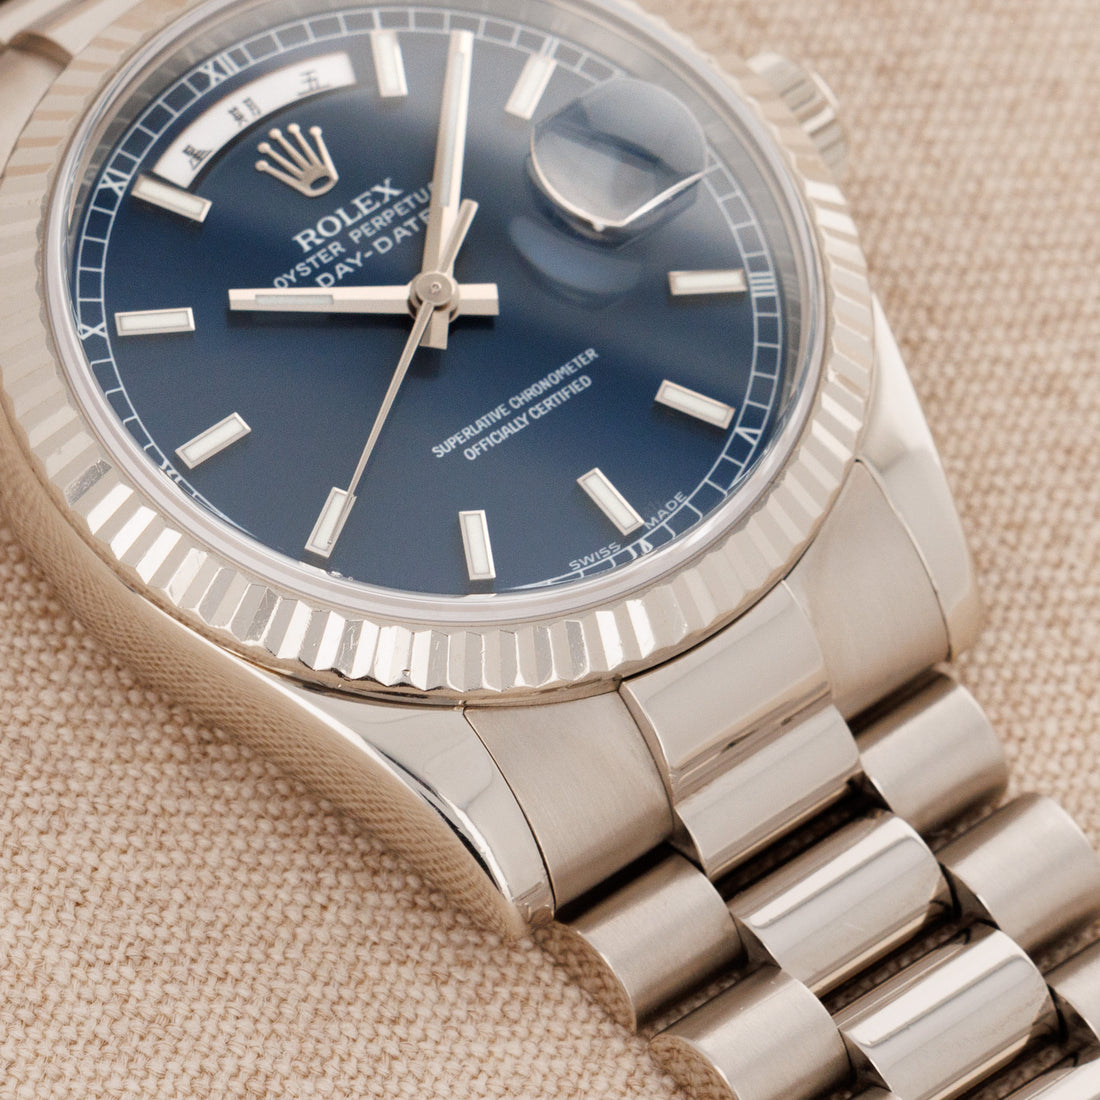 Rolex White Gold Day Date Ref. 118239 with Blue Dial and Chinese Date